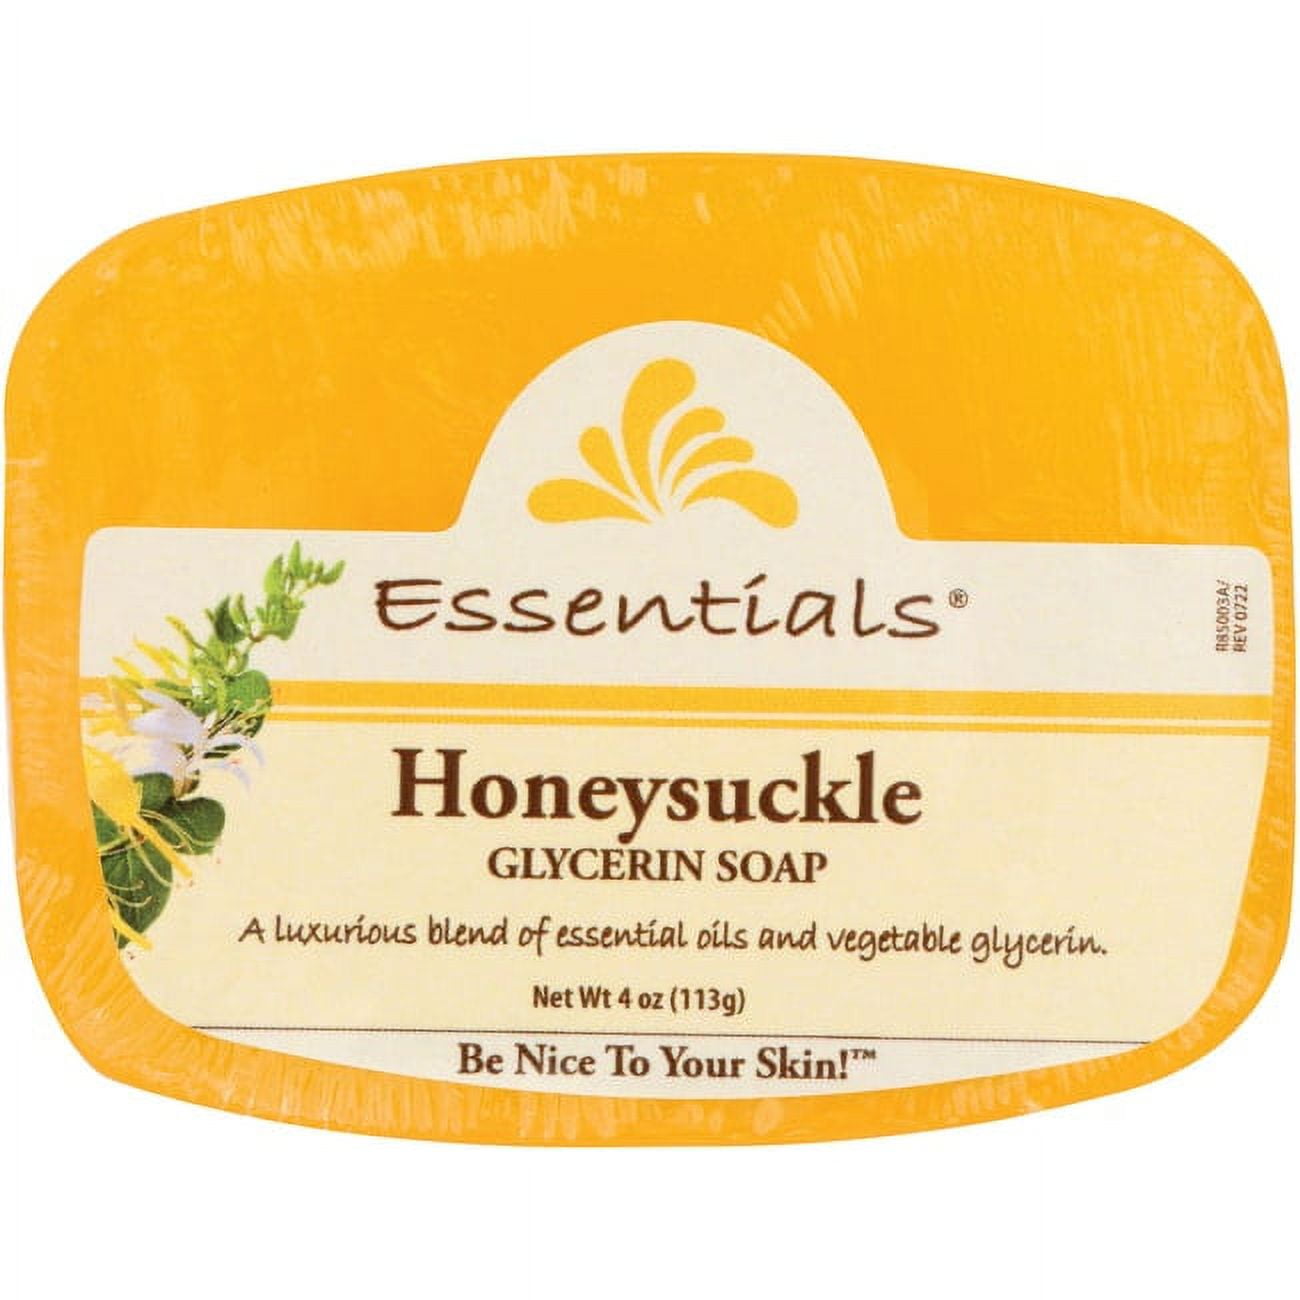 Essentials by Clearly Glycerin Unscented Glycerin Soap, 4 oz